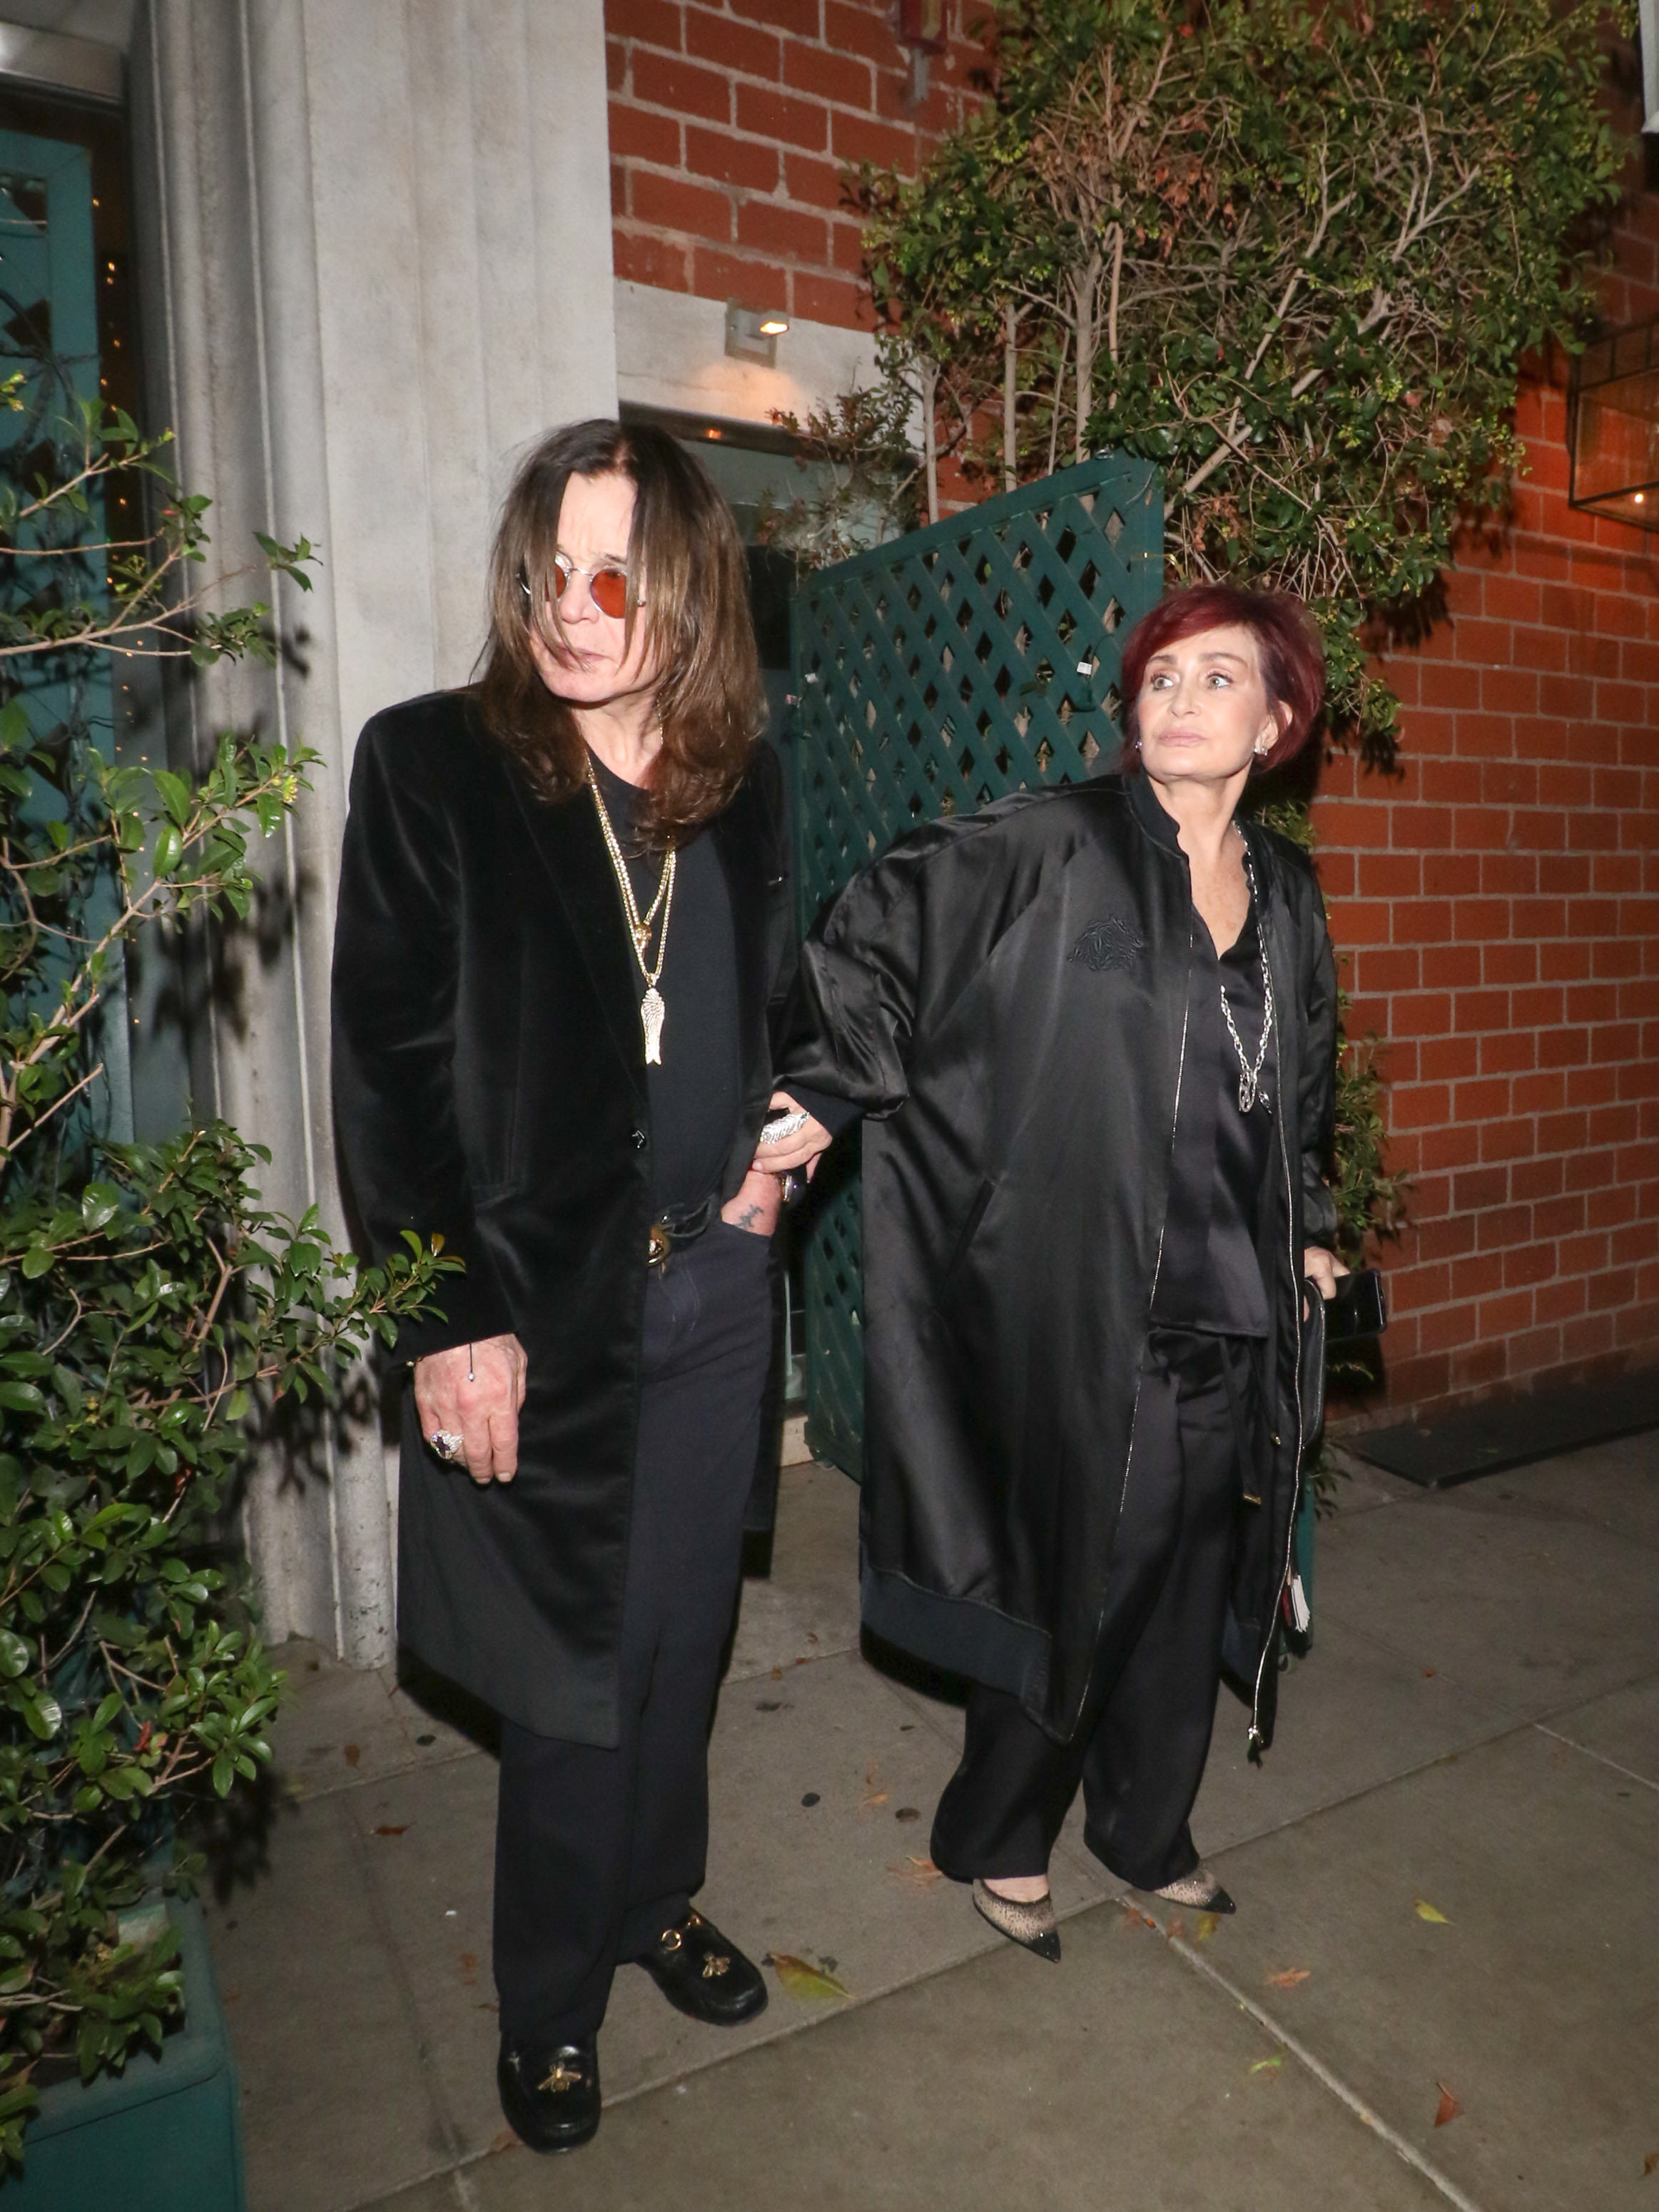 Sharon Osbourne and Ozzy Osbourne are seen on November 30, 2018 in Los Angeles, California | Source: Getty Images